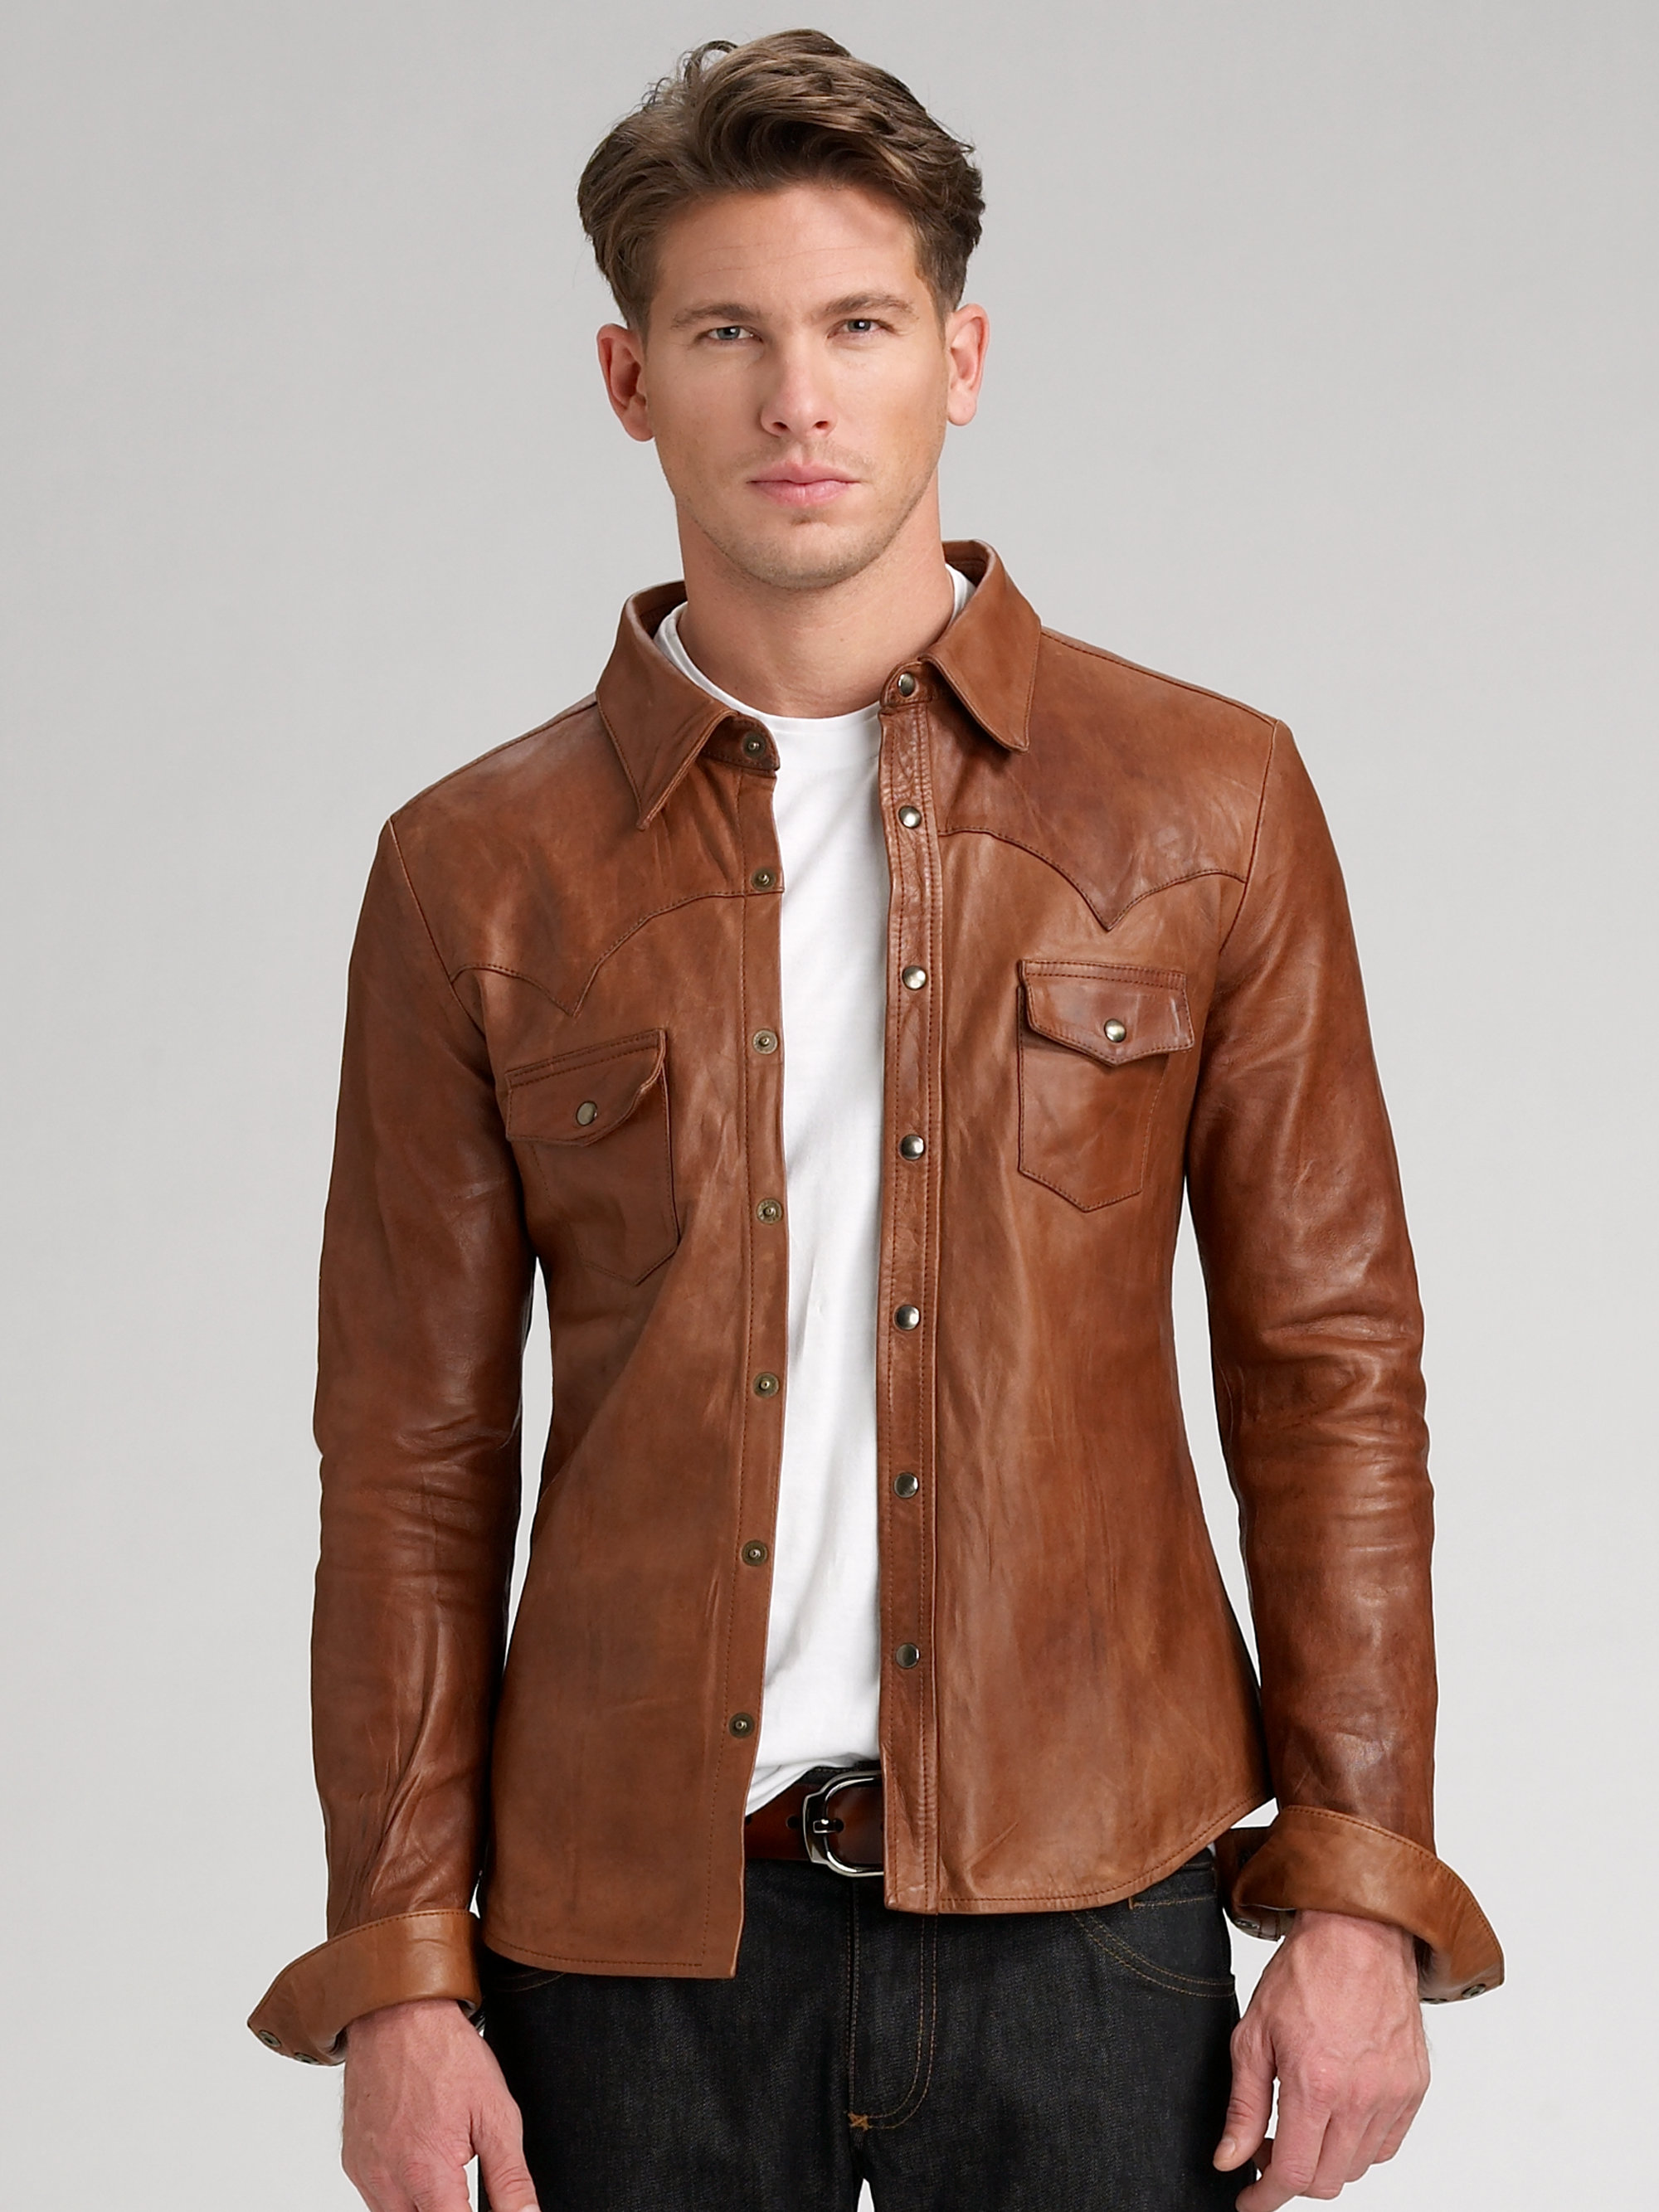 Dolce & Gabbana Leather Shirt in Brown for Men - Lyst